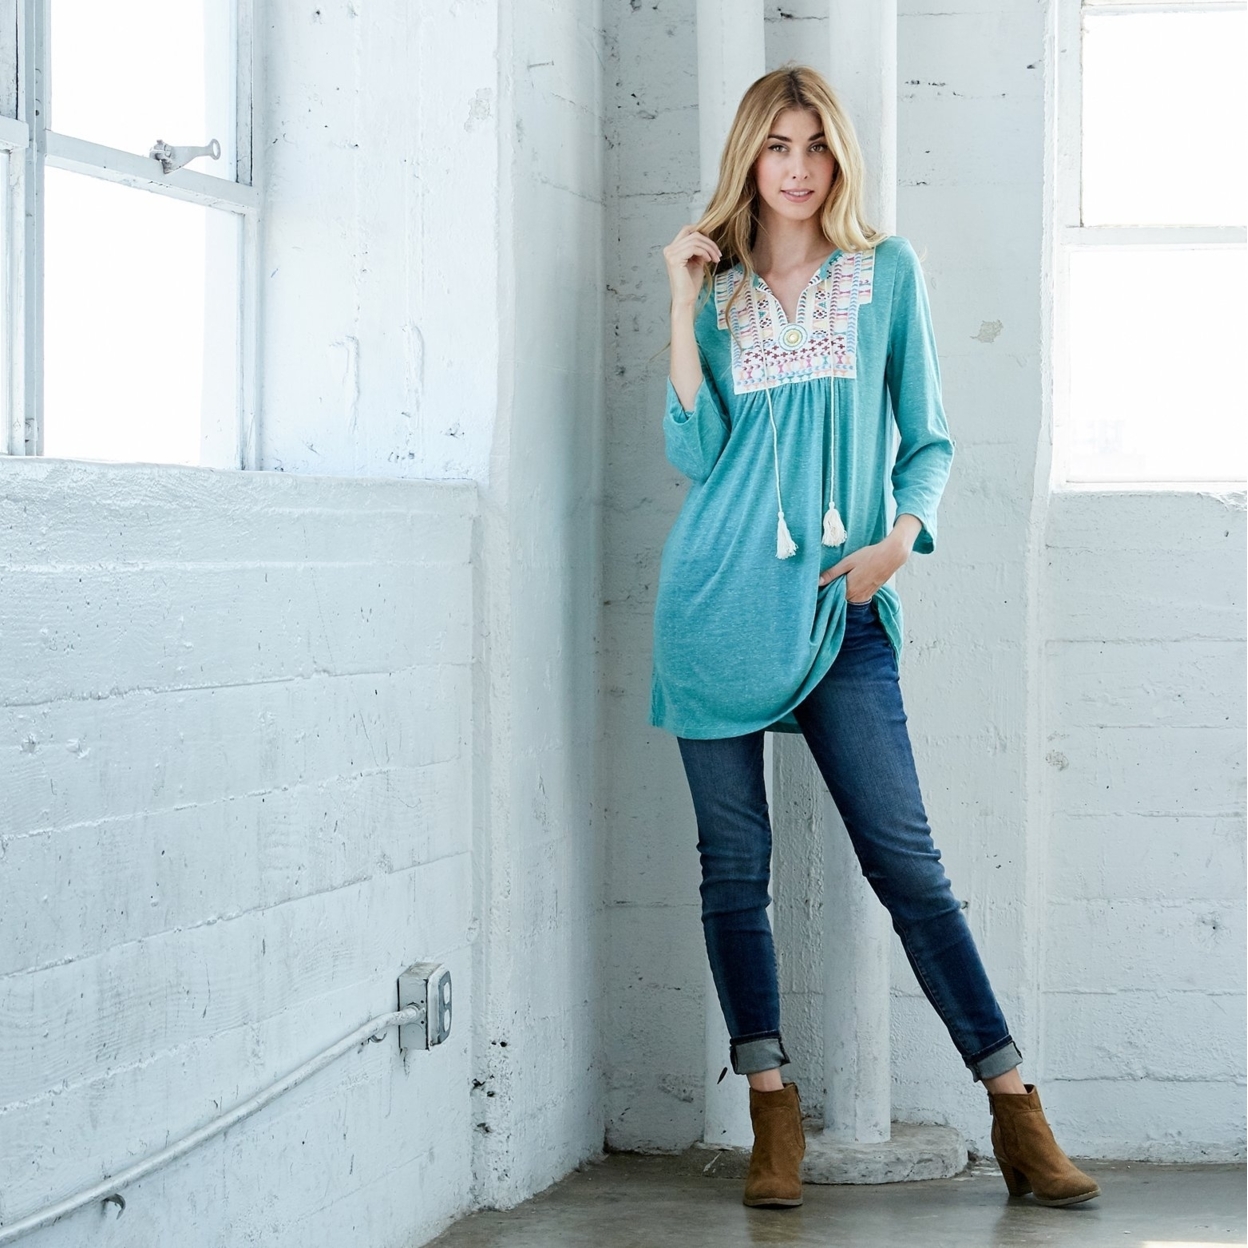 Adorn Me Tunic Top - Teal, Small (2-6)